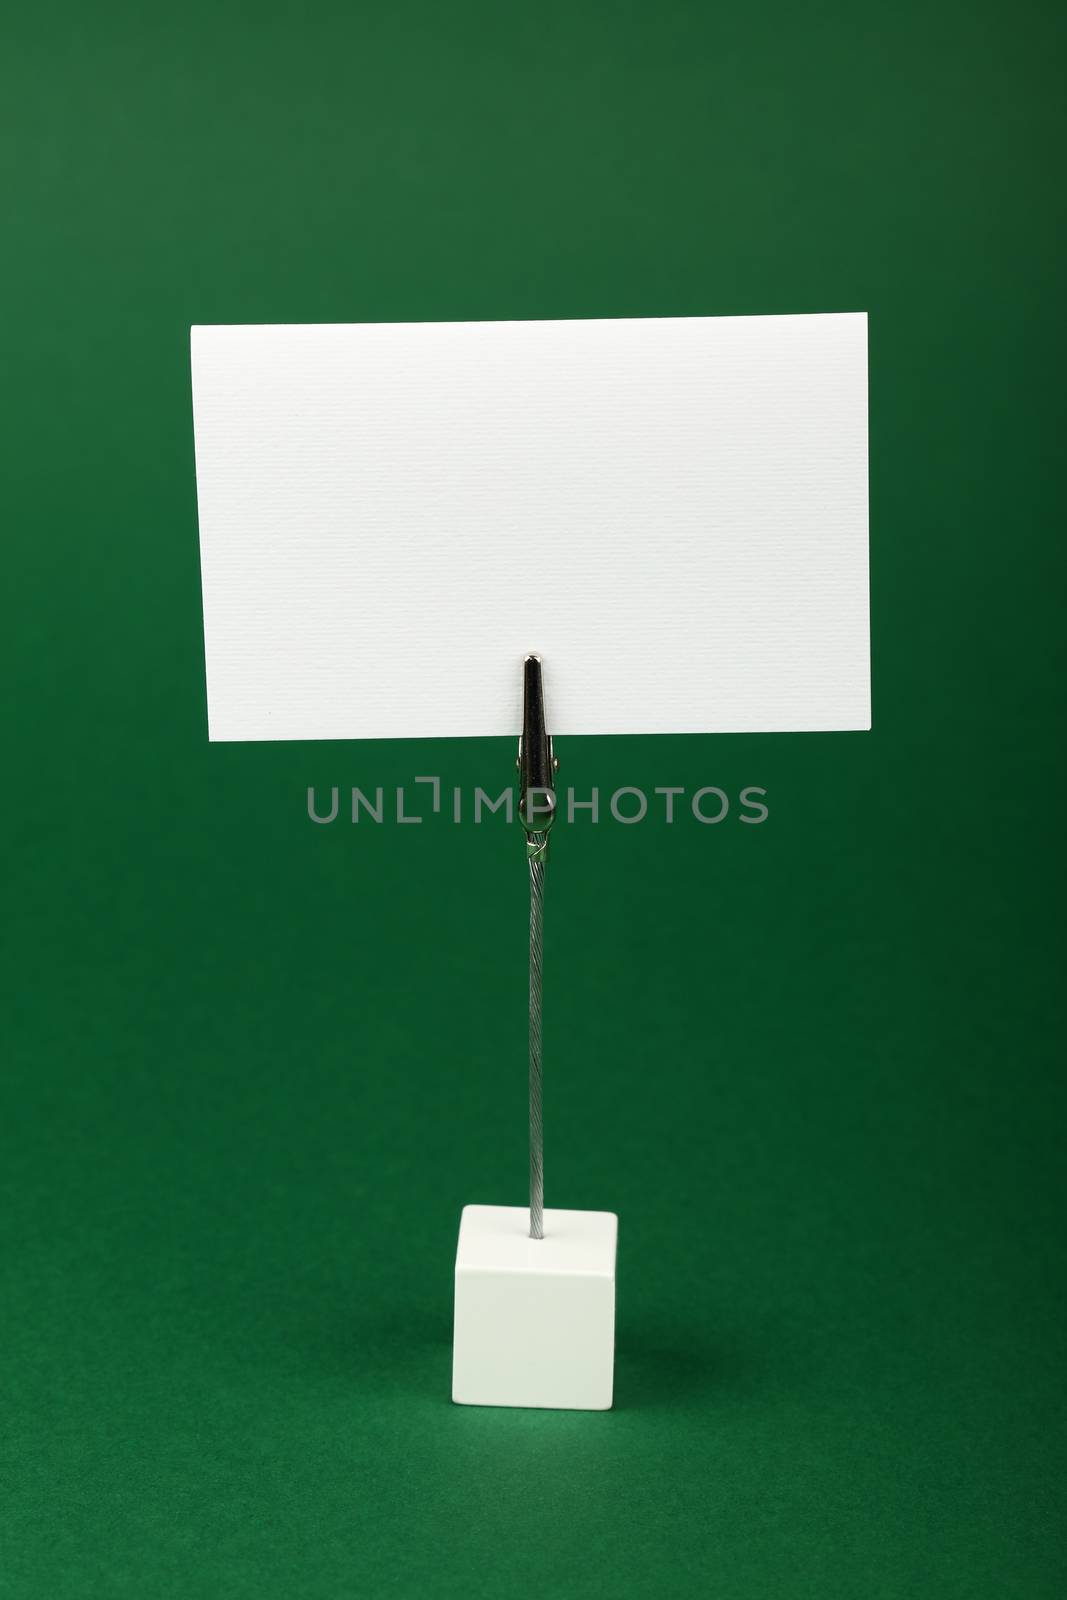 Blank white cardboard sign with copy space on metal note holder over green, paper background, front side view